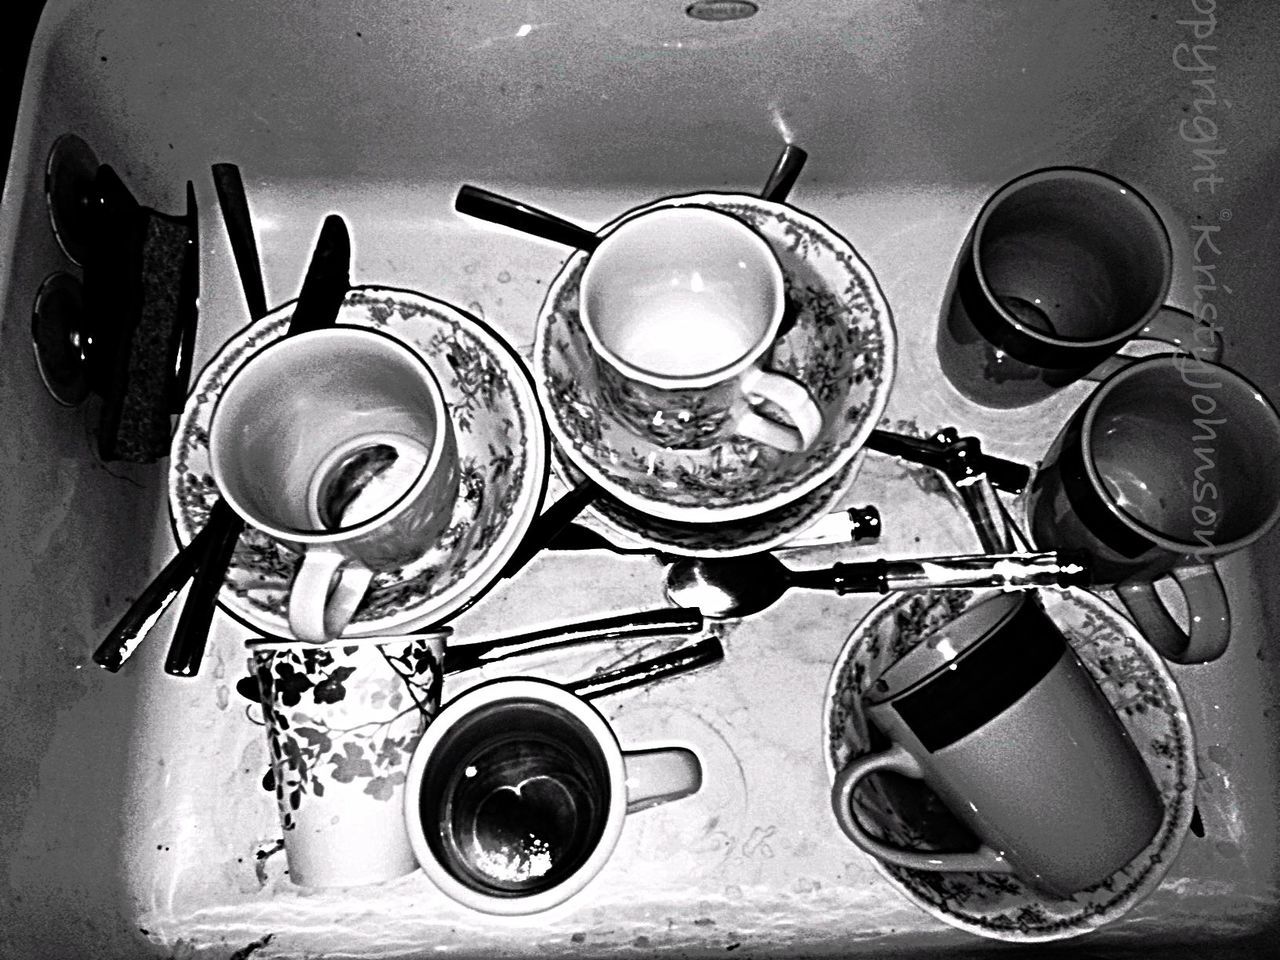 indoors, still life, table, food and drink, high angle view, drink, coffee cup, spoon, kitchen utensil, cup, container, plate, no people, refreshment, directly above, close-up, domestic kitchen, freshness, fork, saucer